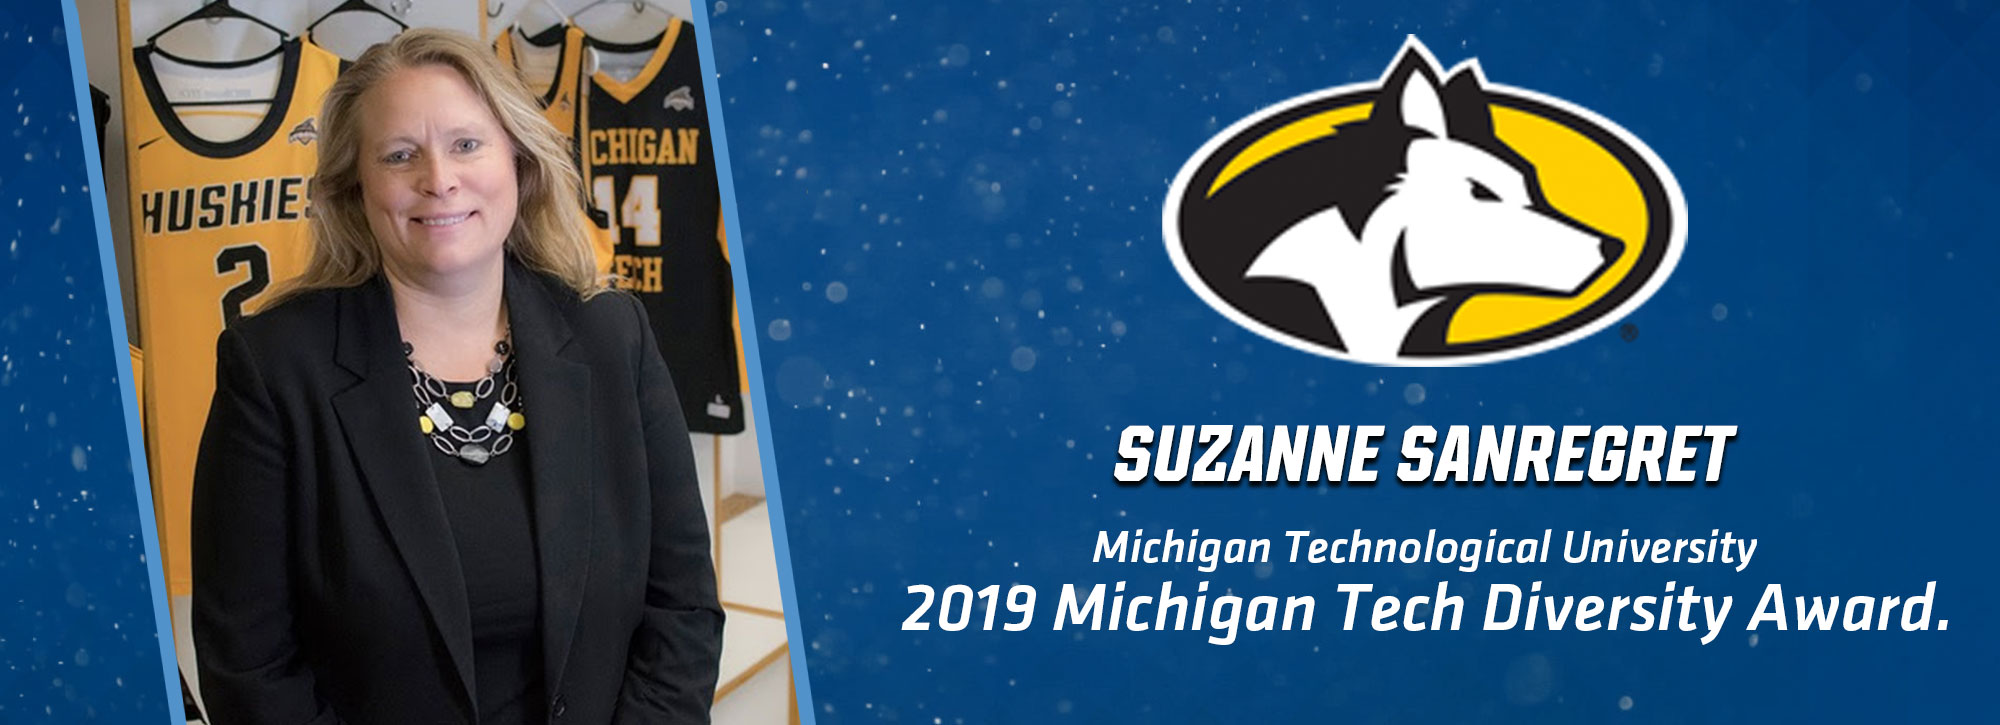 Michigan Tech Recognizes Suzanne Sanregret With 2019 Diversity Award